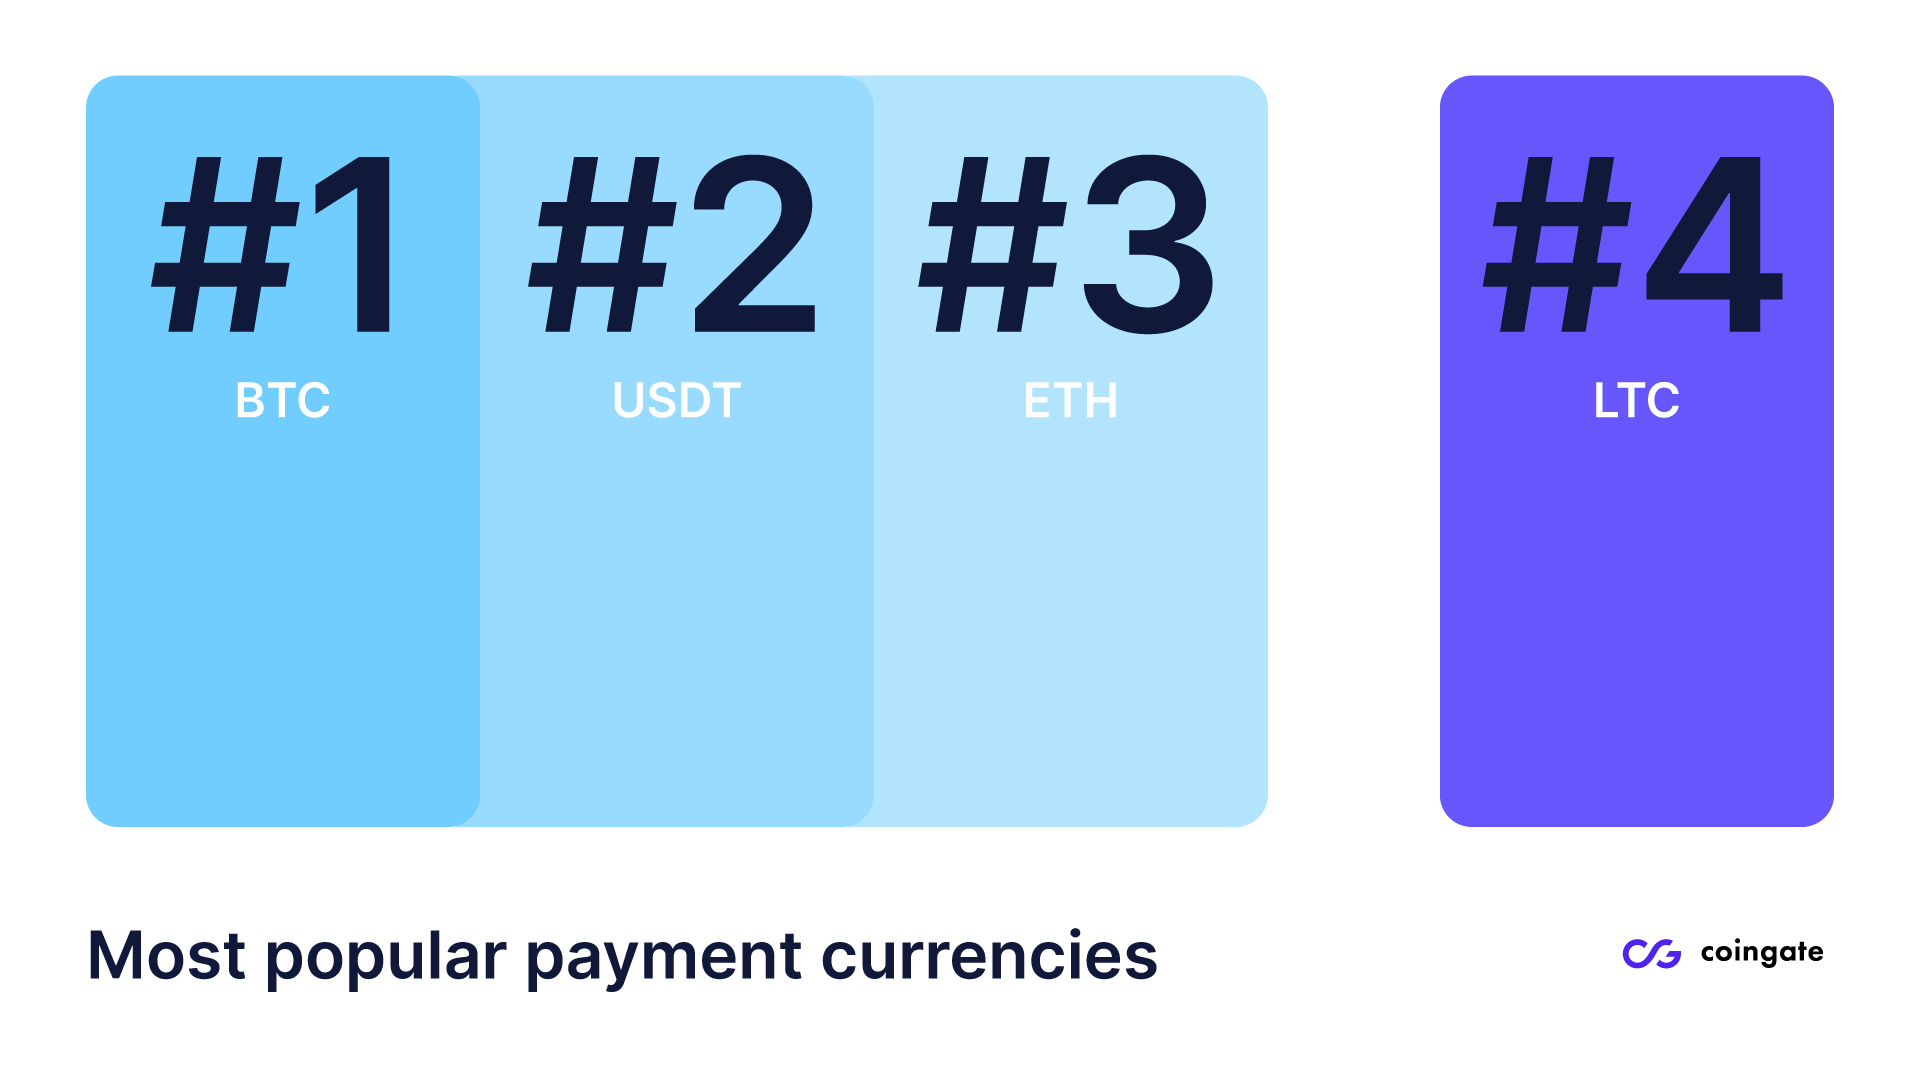 litecoin top payment currency